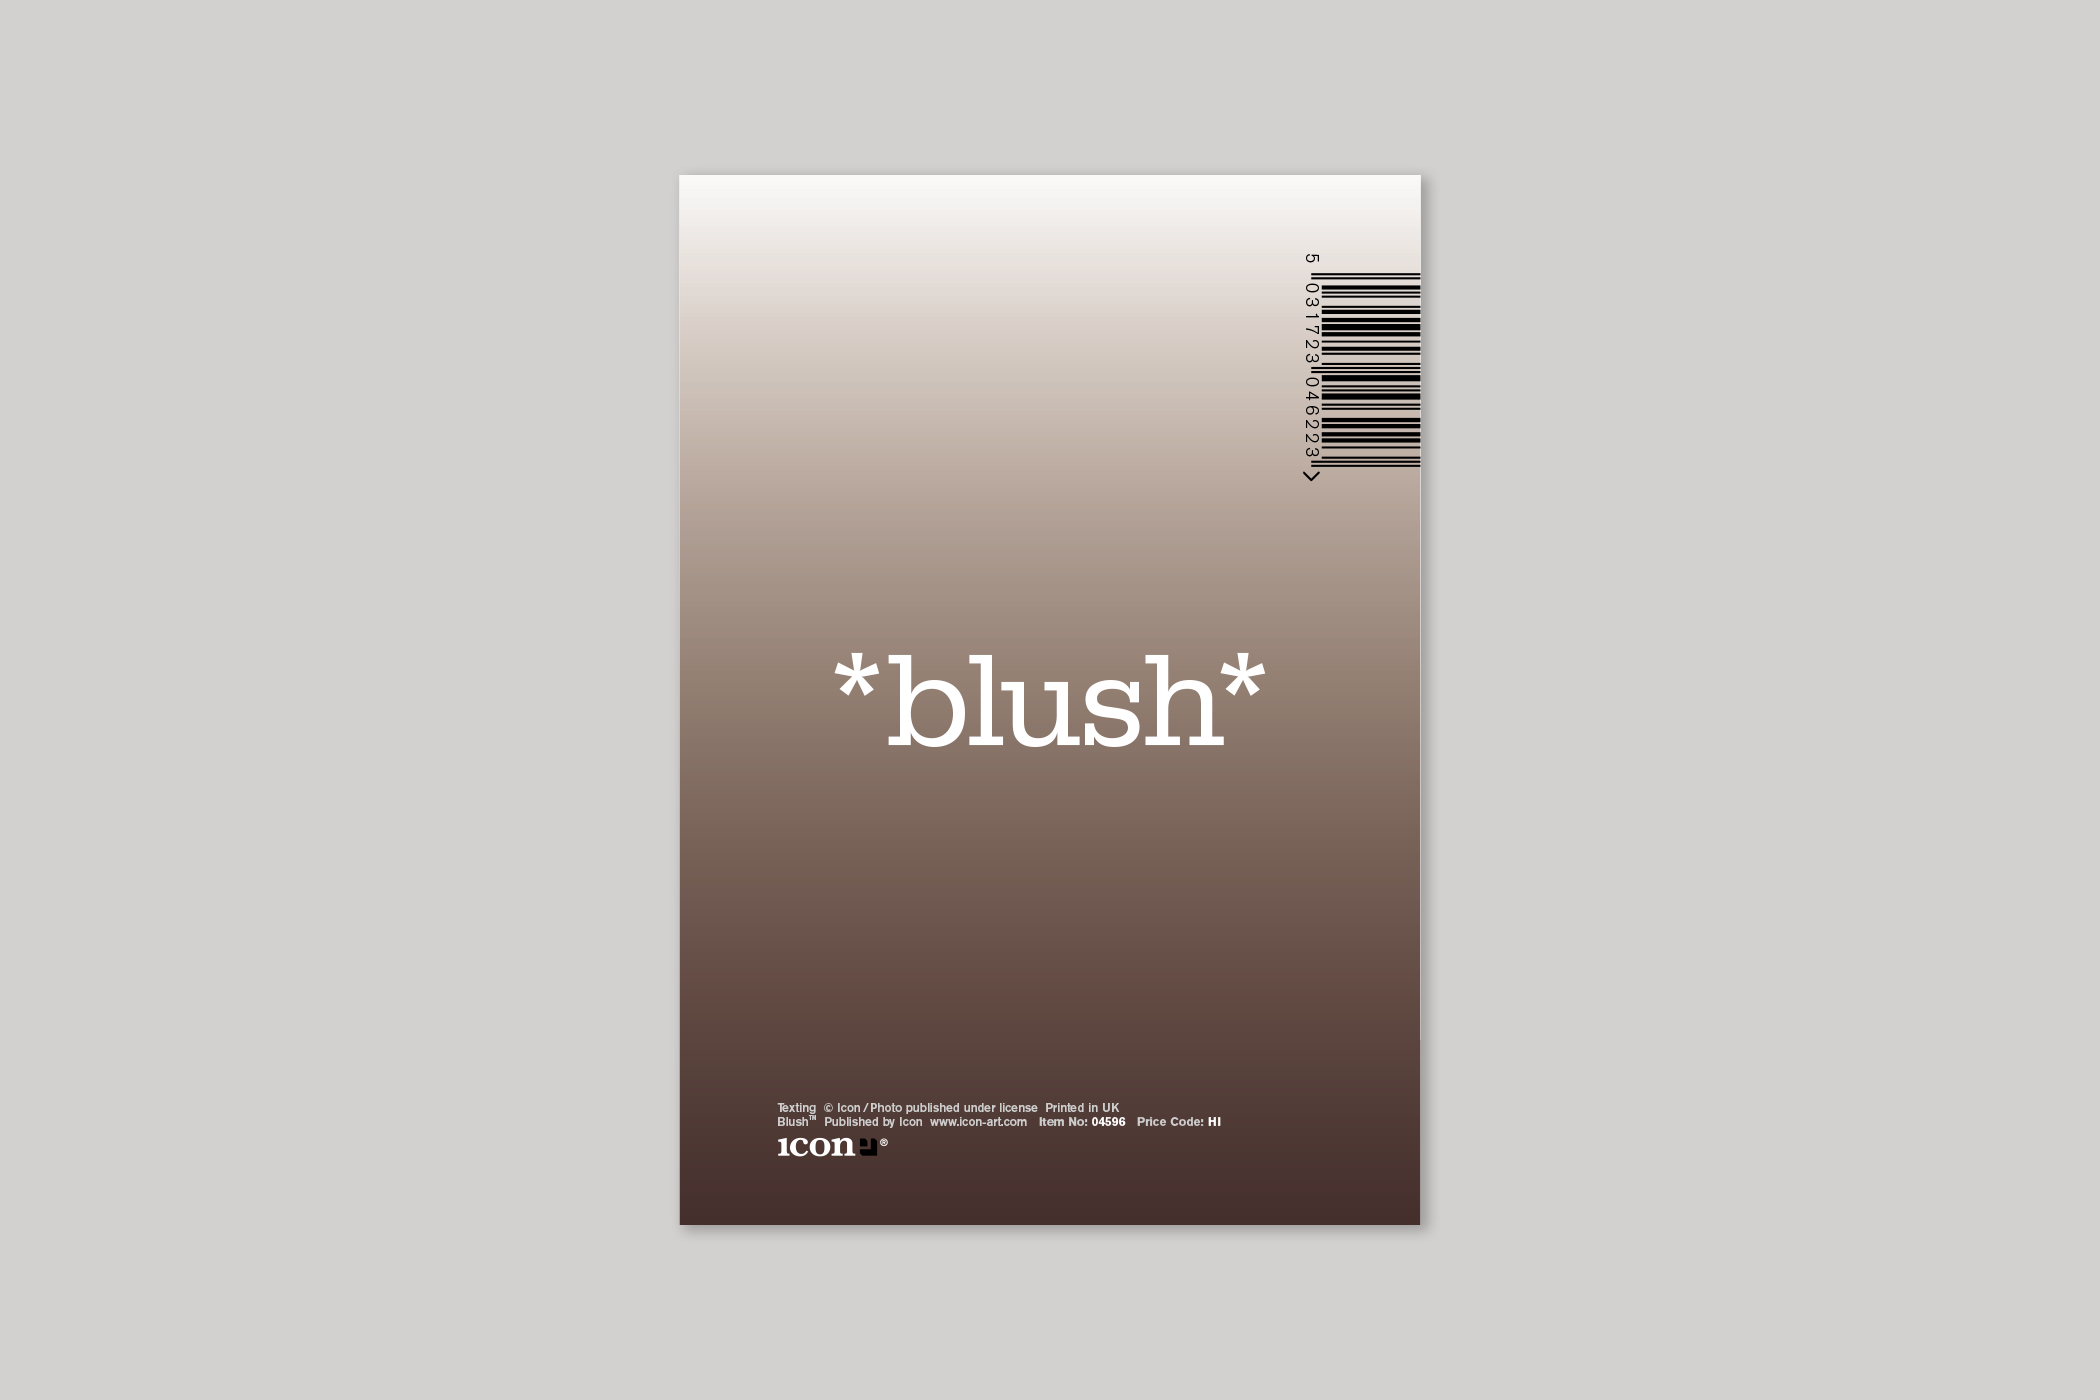 Texting from Blush humour range of greeting cards by Icon, with envelope.